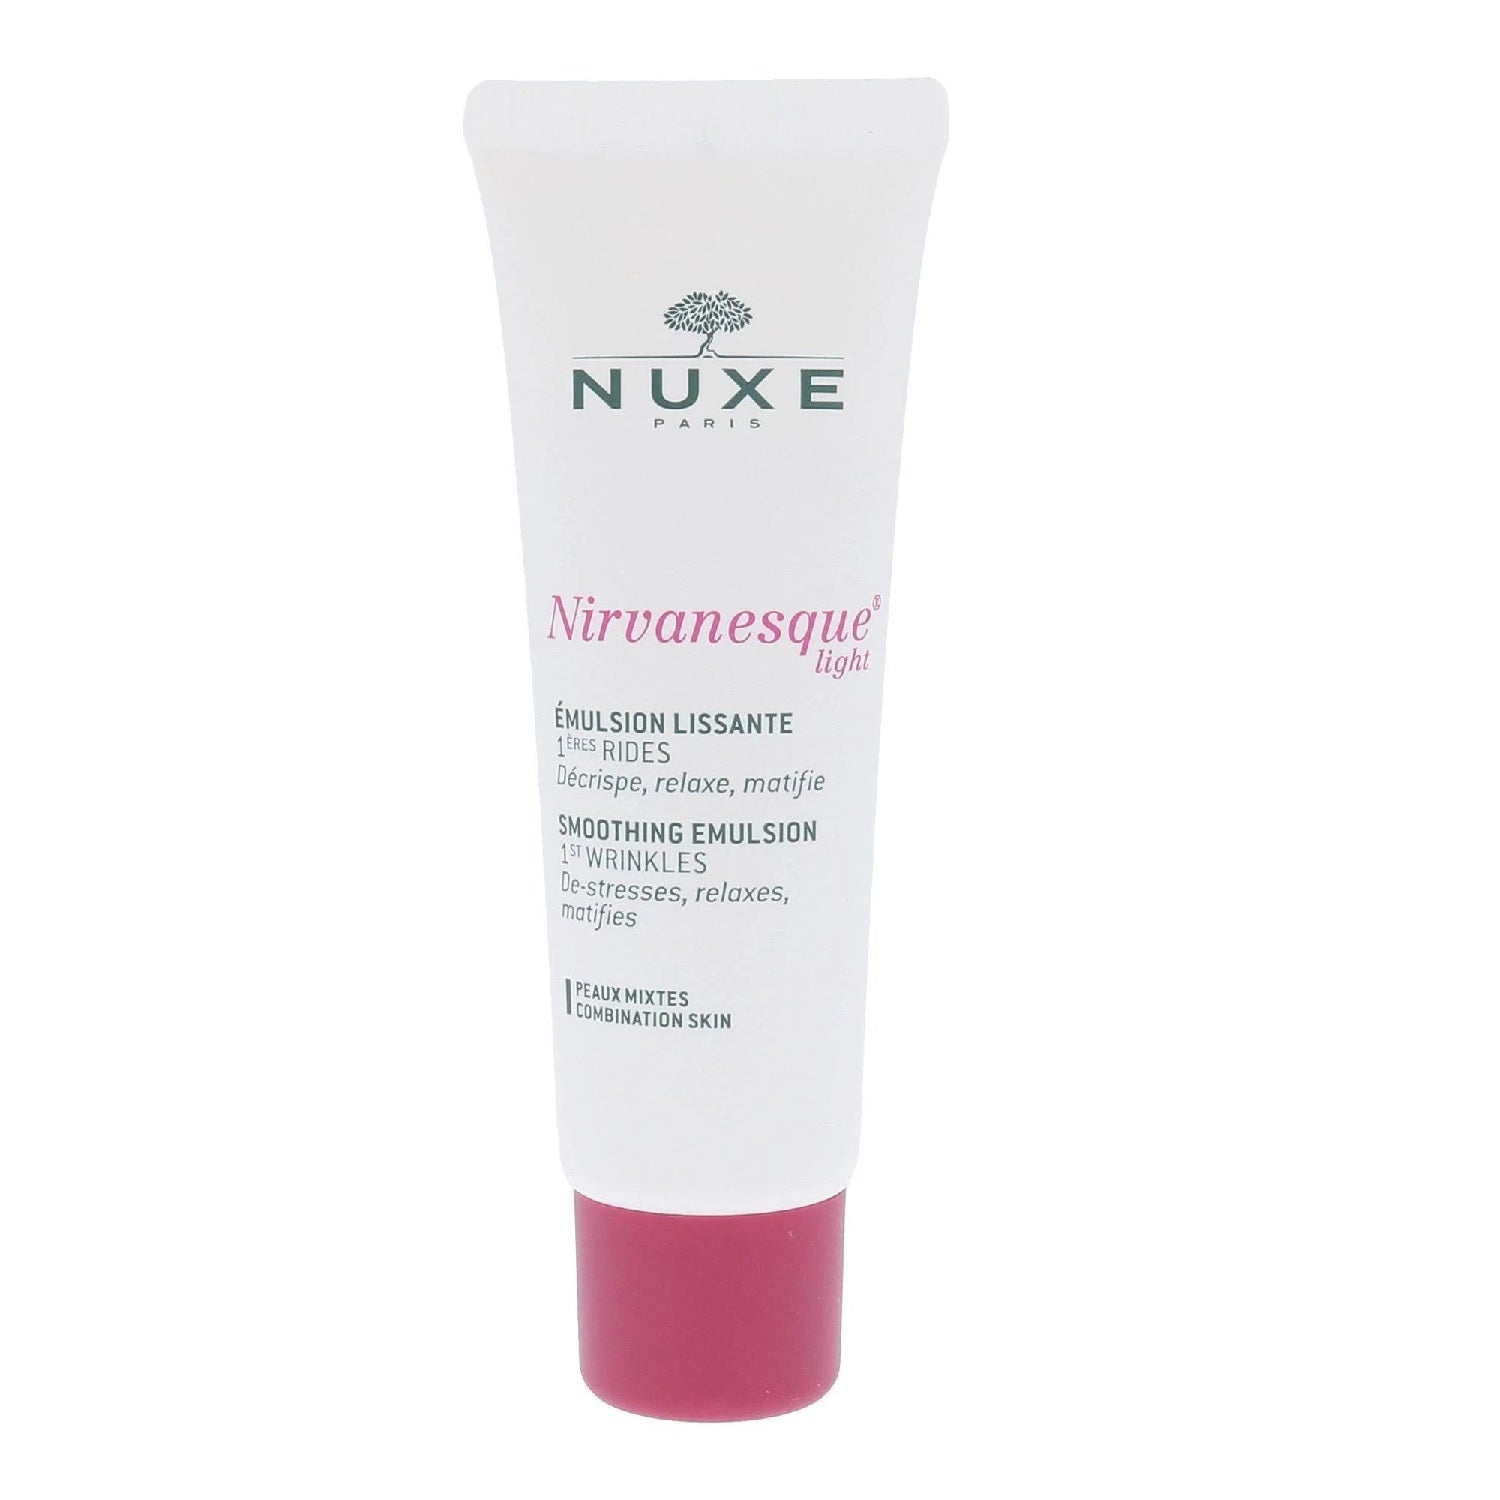 Nuxe Nirvanesque Light Smoothing 1St Wrinkles For Combination Skin Emulsion 50ml - LookincredibleNuxe3264680006081